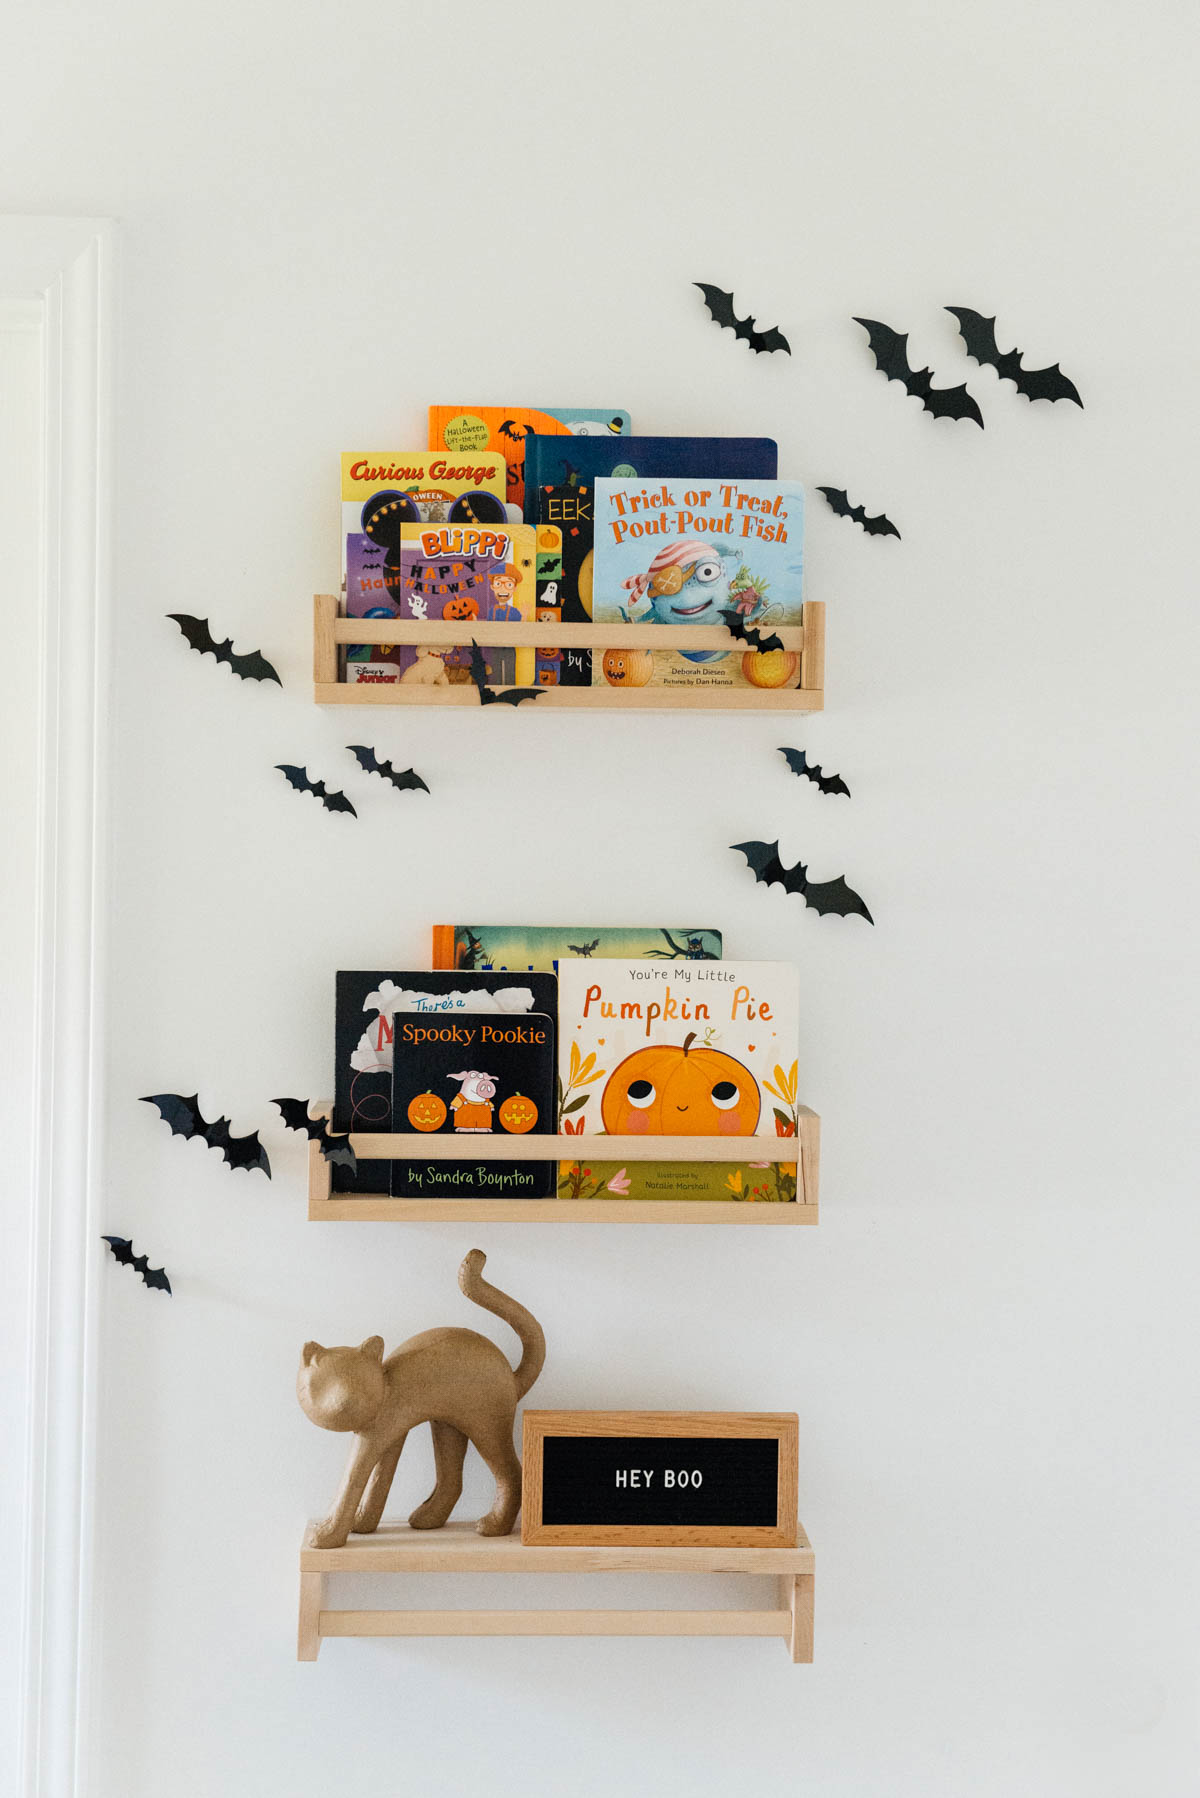 Best Halloween Books for Toddlers styled on wooden shelves with bat wall decals in nursery